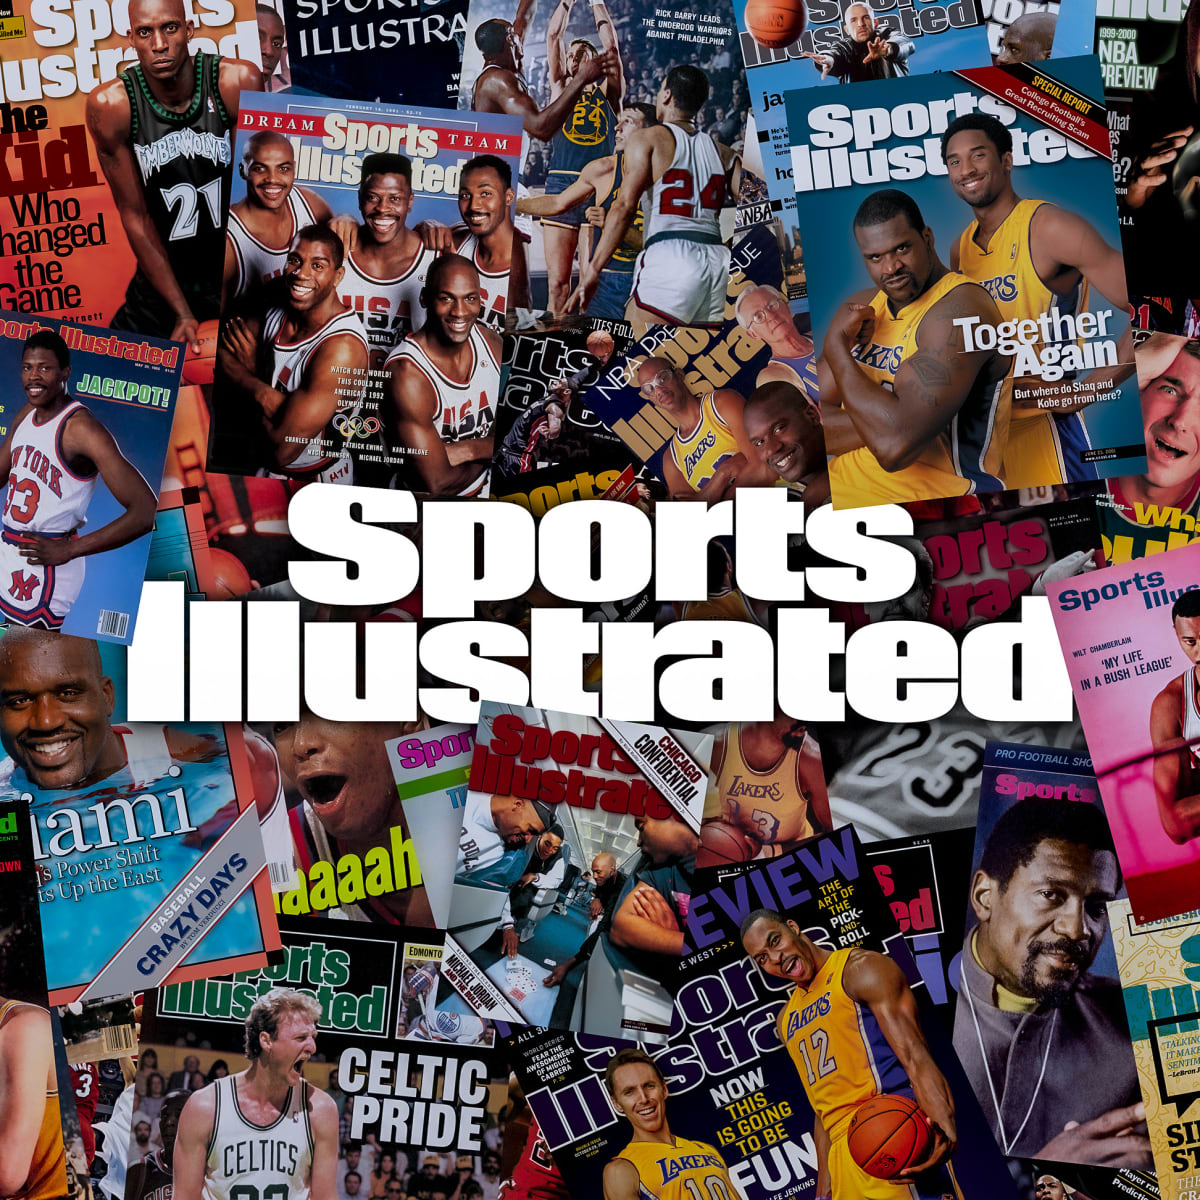 His Royal Highness Bernard King Raises The Game To A New Sports Illustrated  Cover by Sports Illustrated